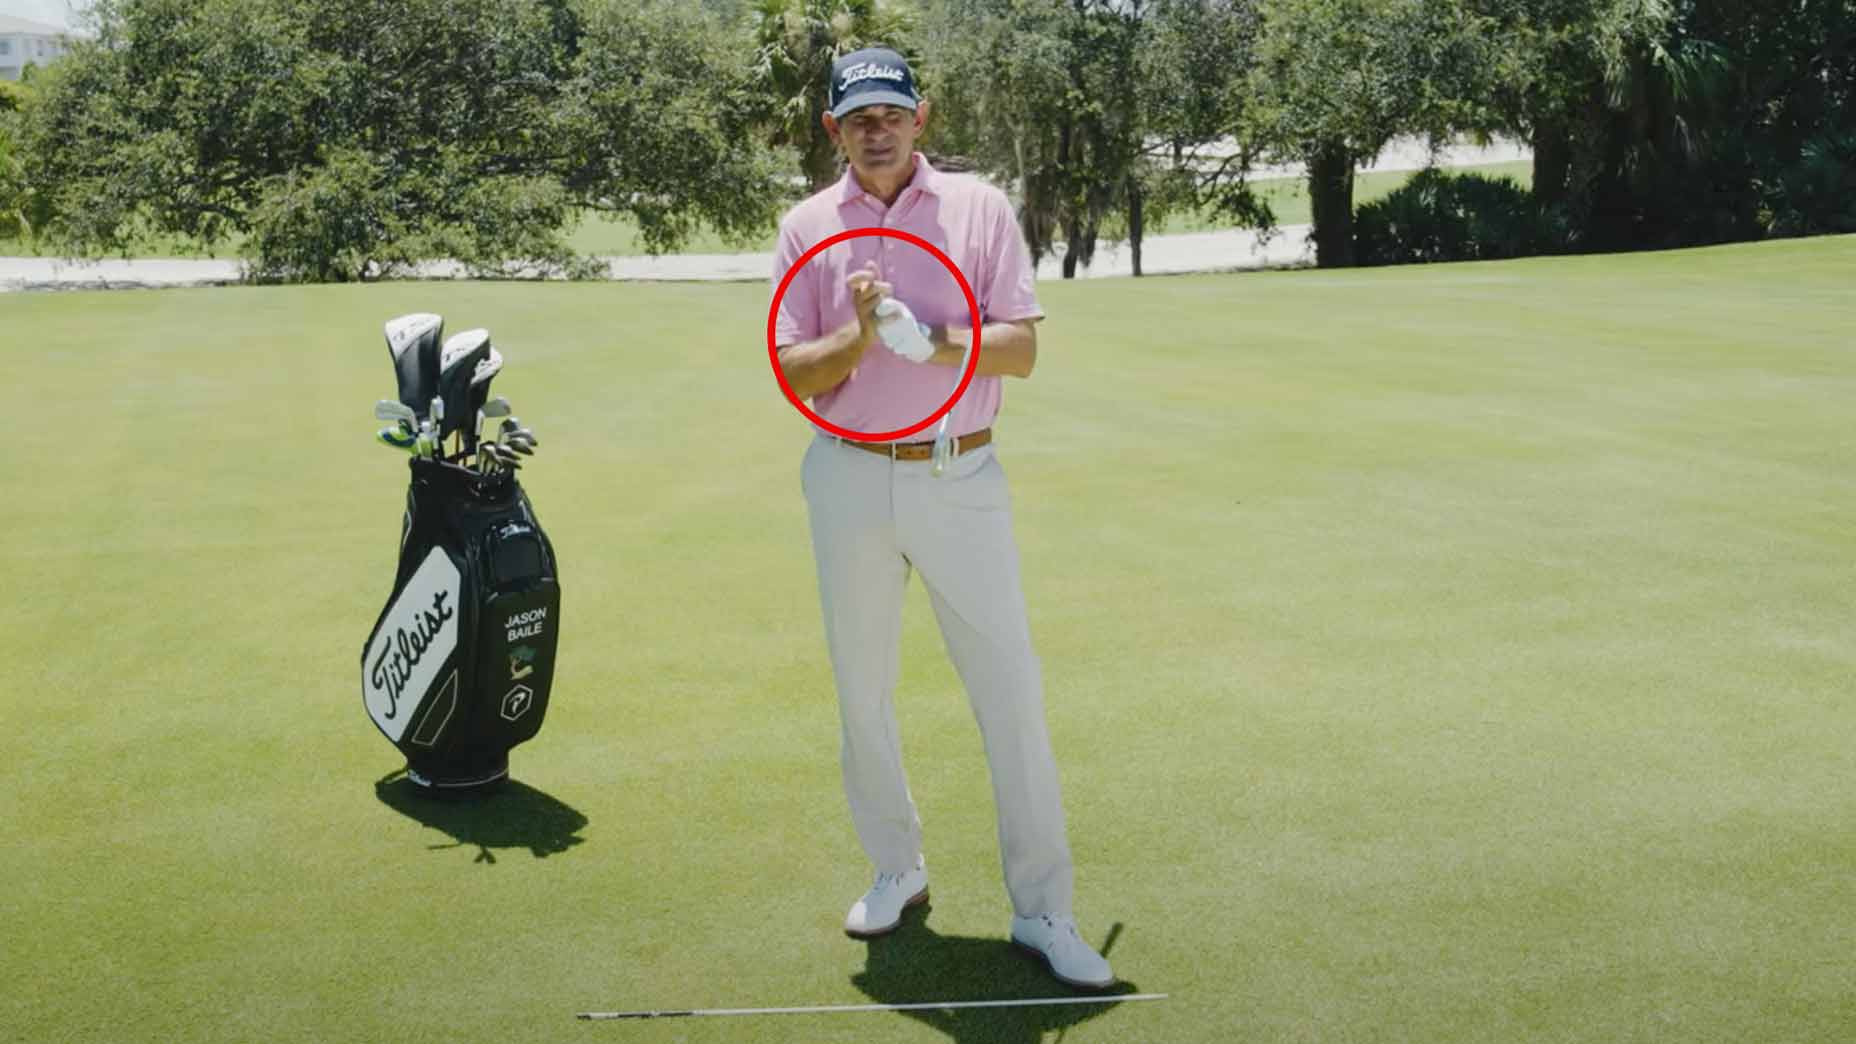 How much grip pressure to apply during the golf swing